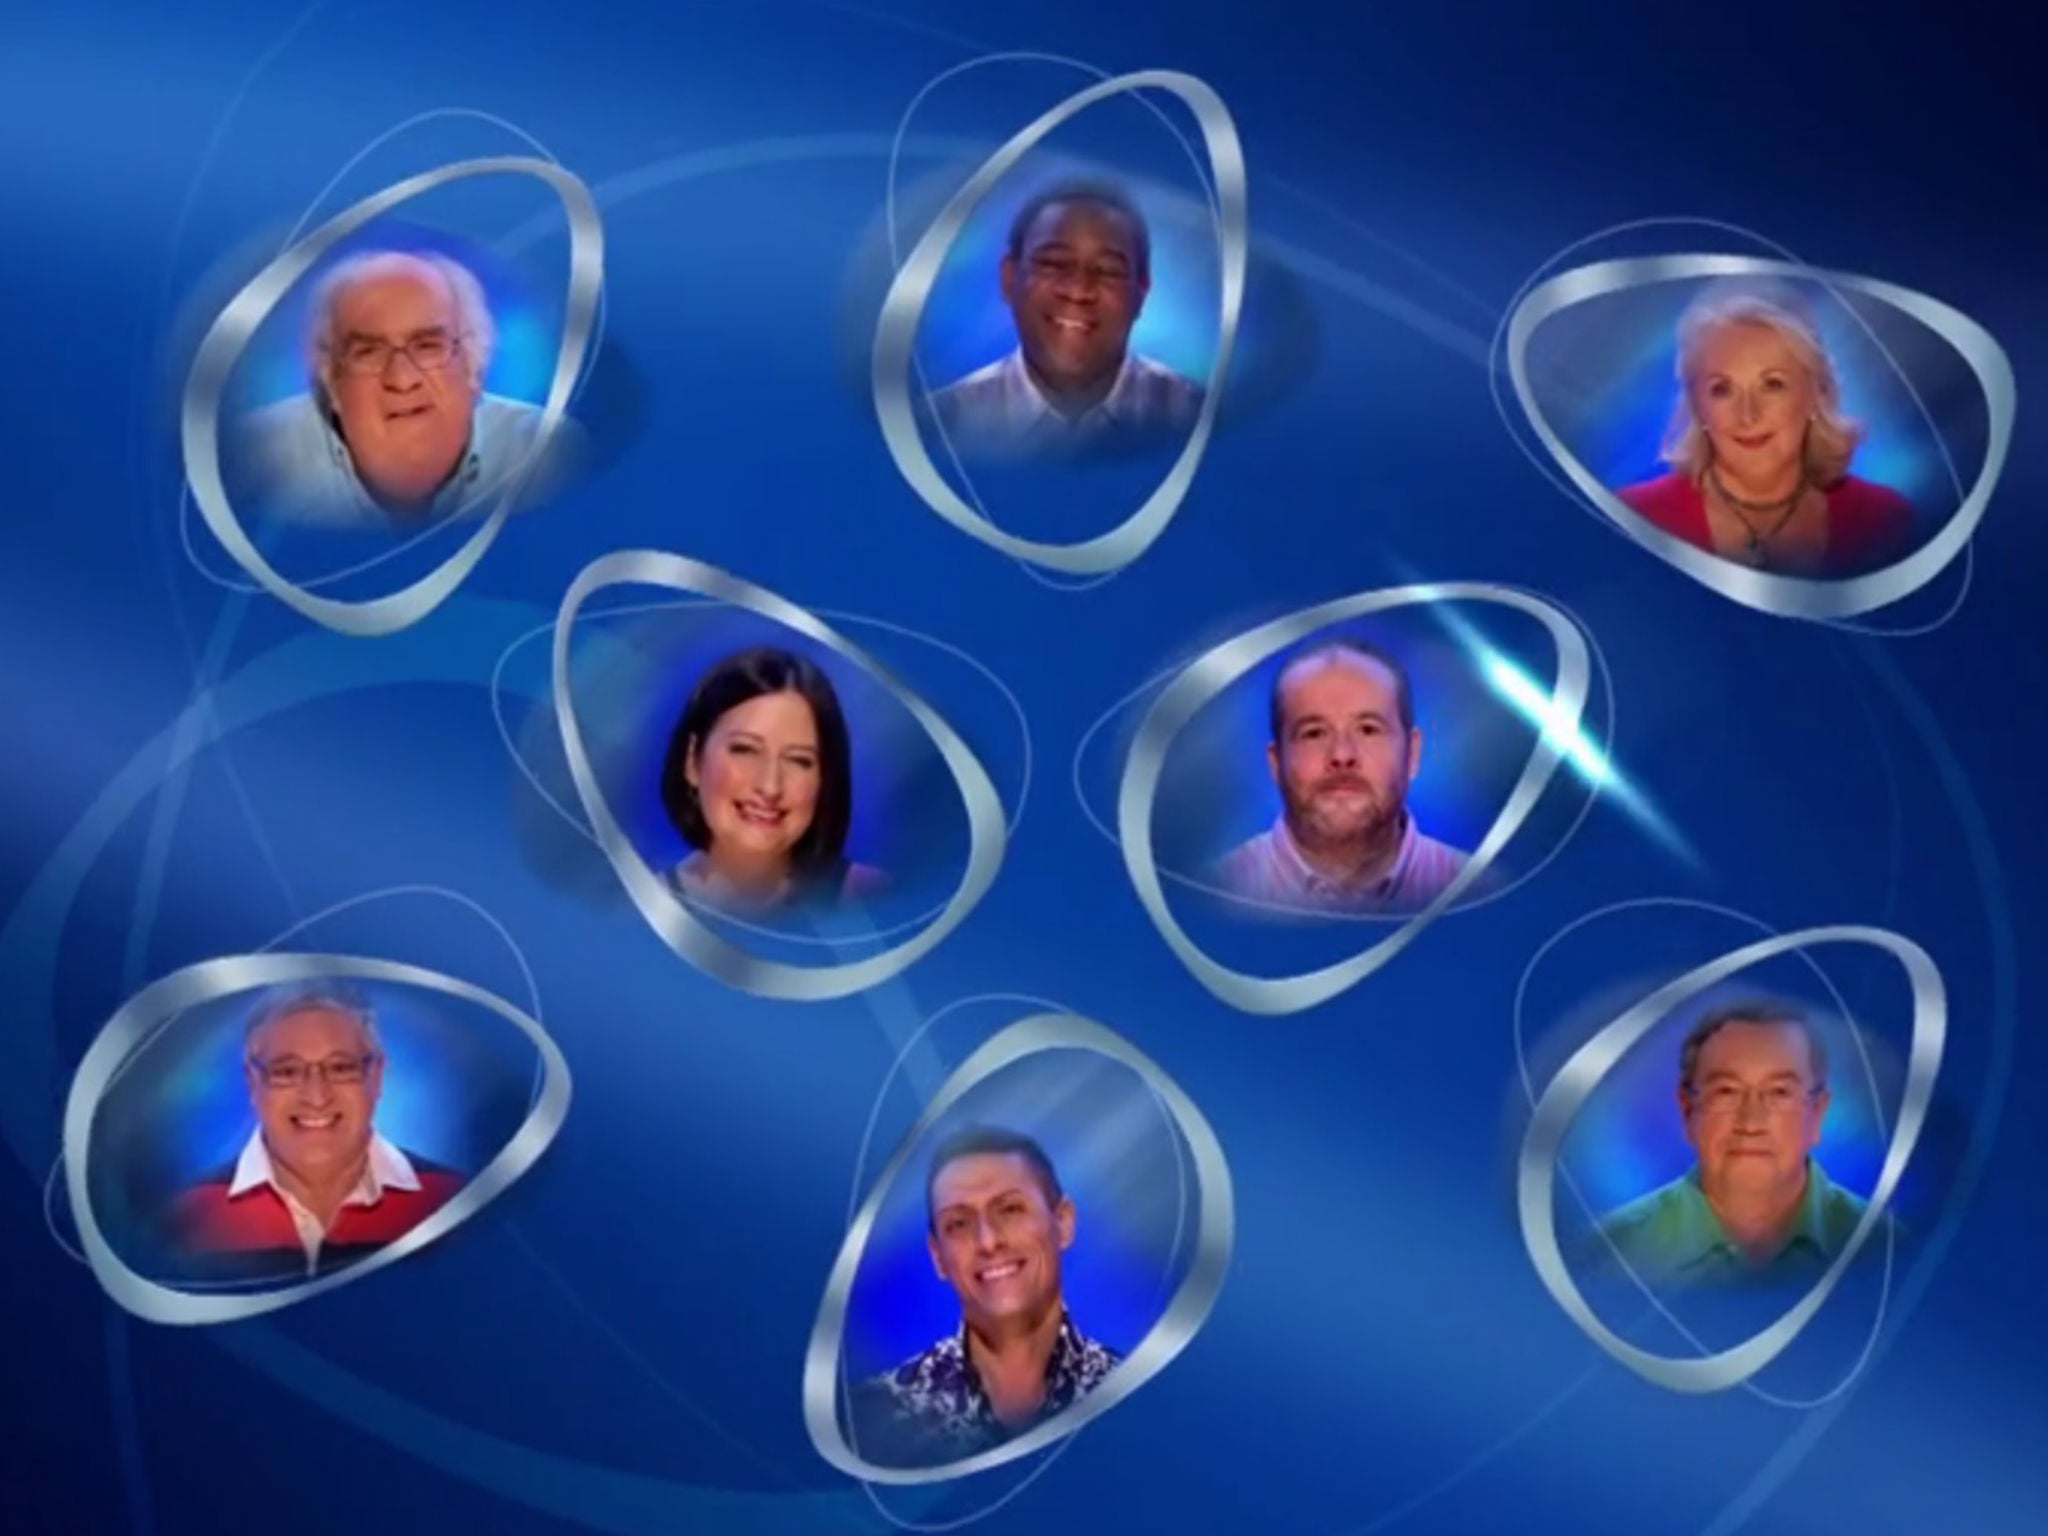 Eggheads pits a team of game show champions against a team of challengers